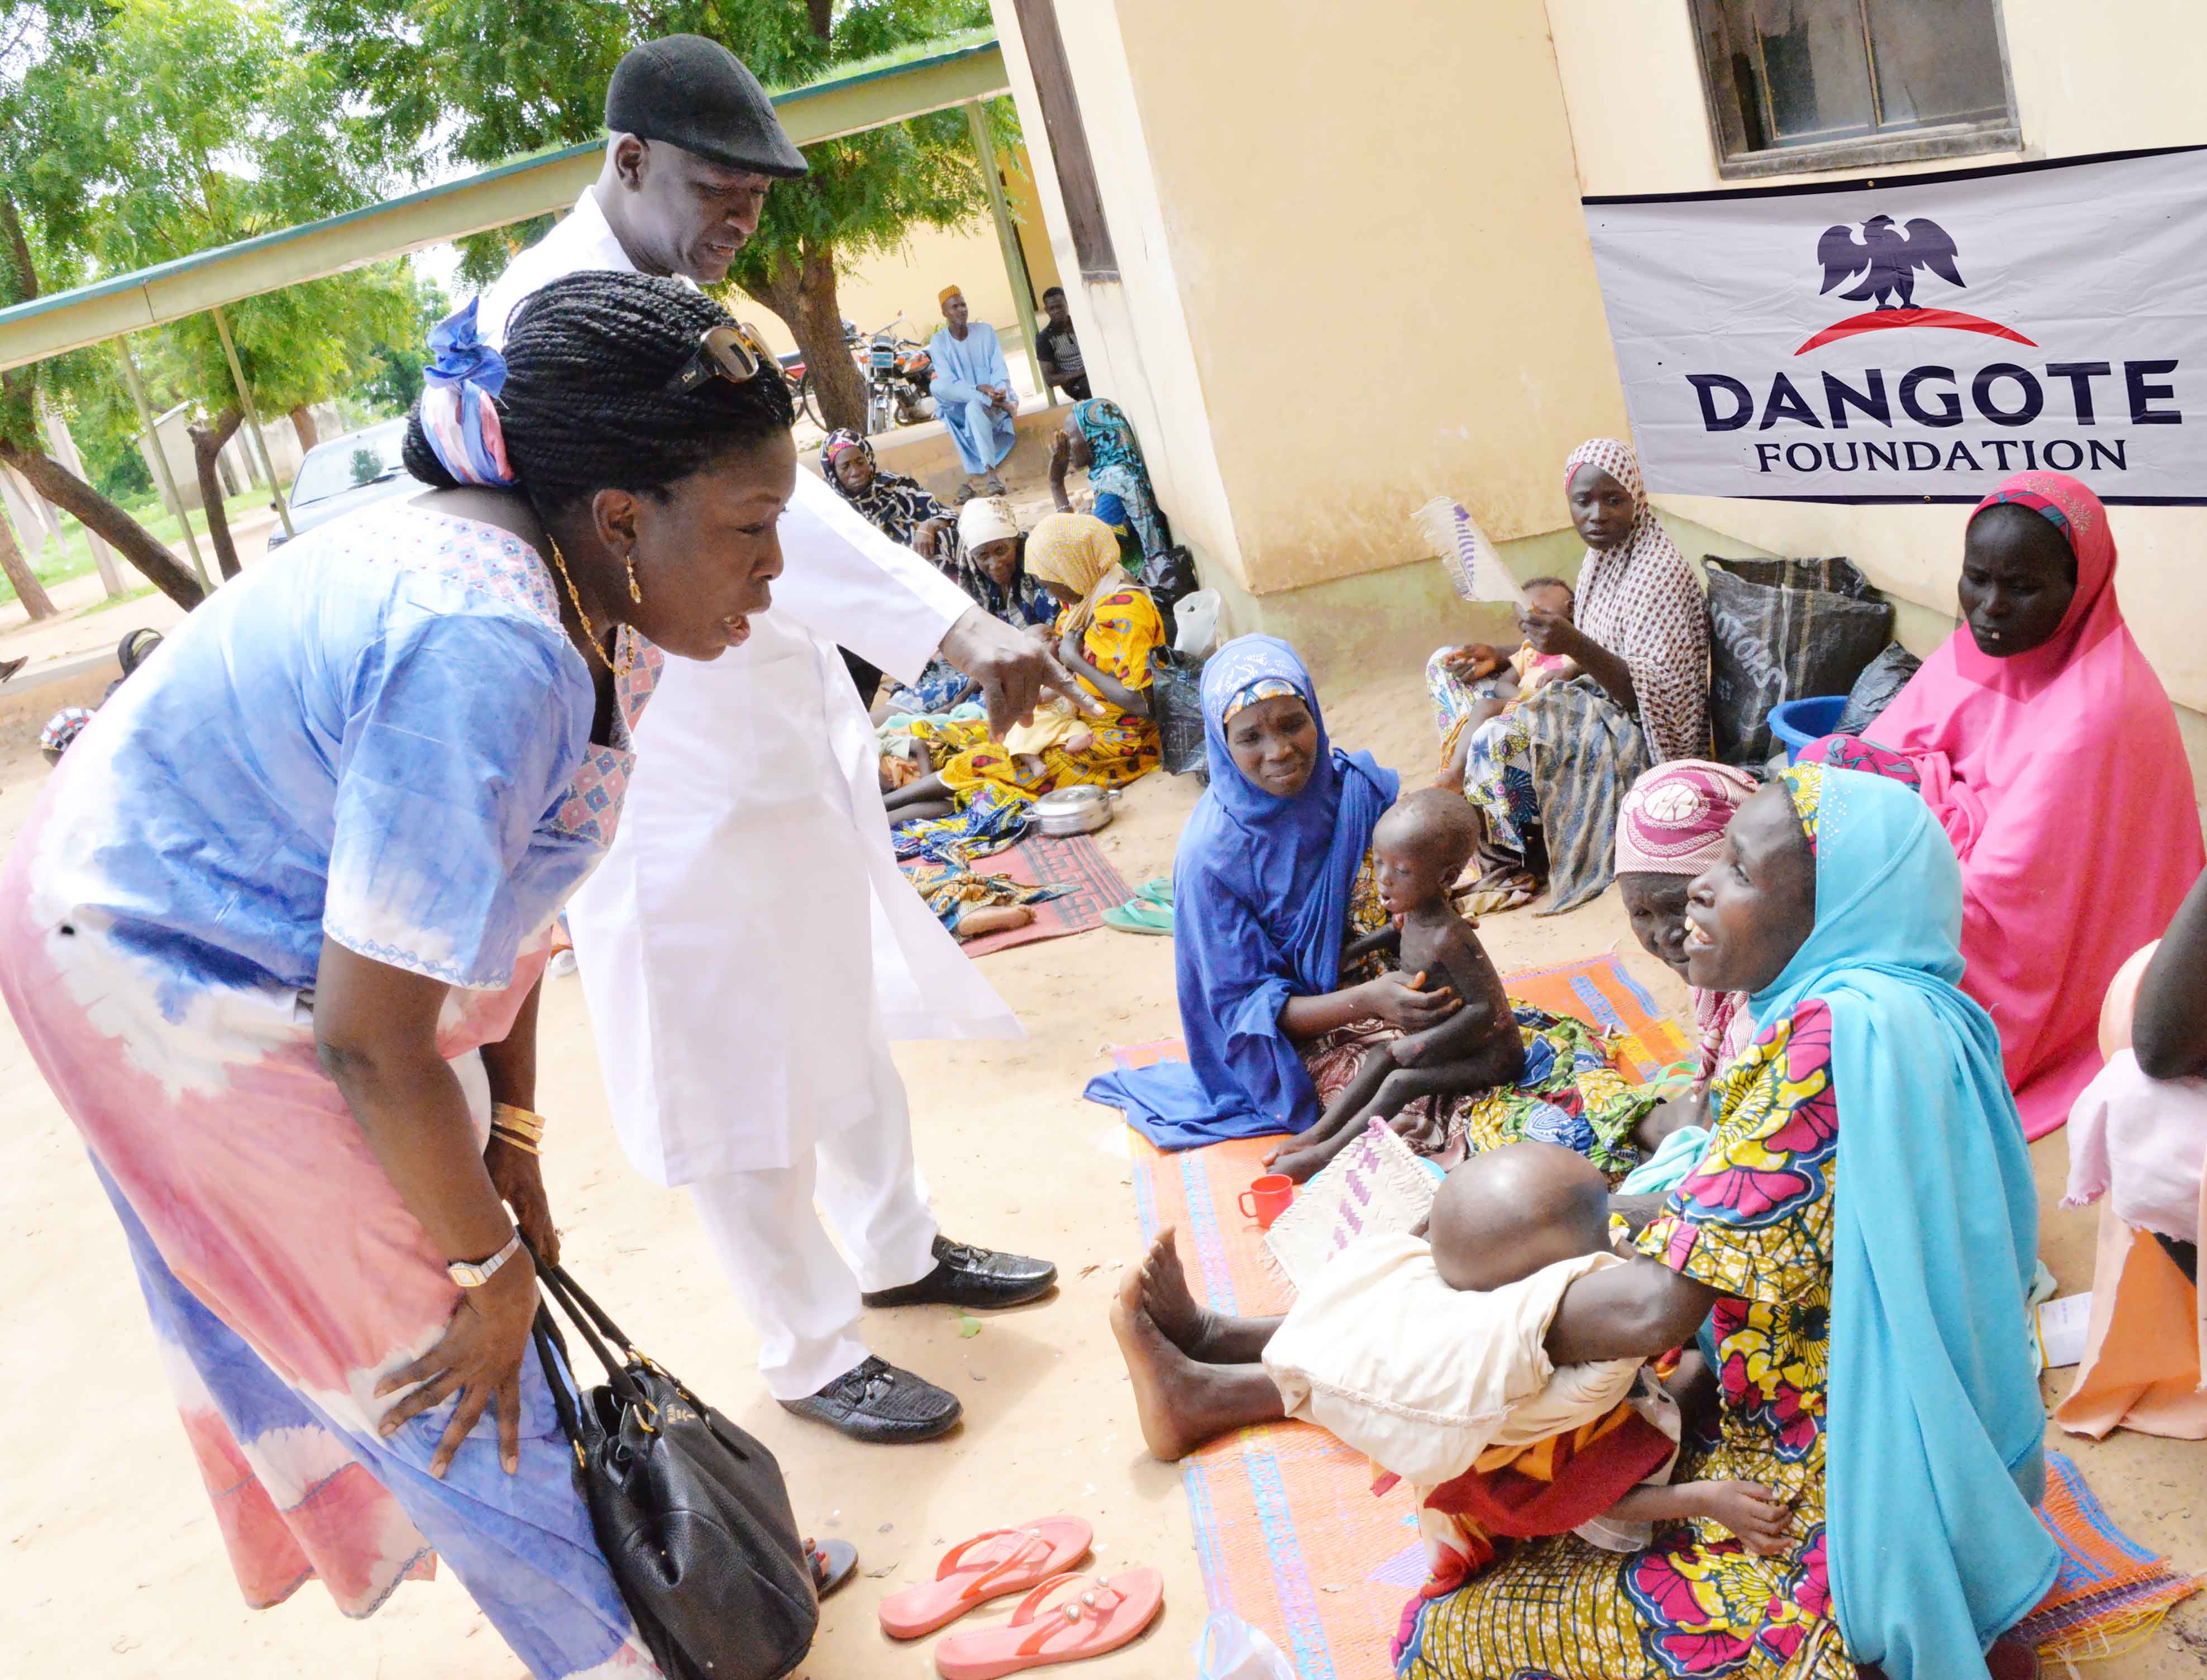 Dangote Foundation,  Zouera Youssoufou with Project Leader, Central Bank Medical Services, Kano (North West), Dr. Tasiu Suleiman Gachi chatting with some beneficiaries  at Dangote Foundation sponsored community health outreach in Kankia L.G.A Katsina State